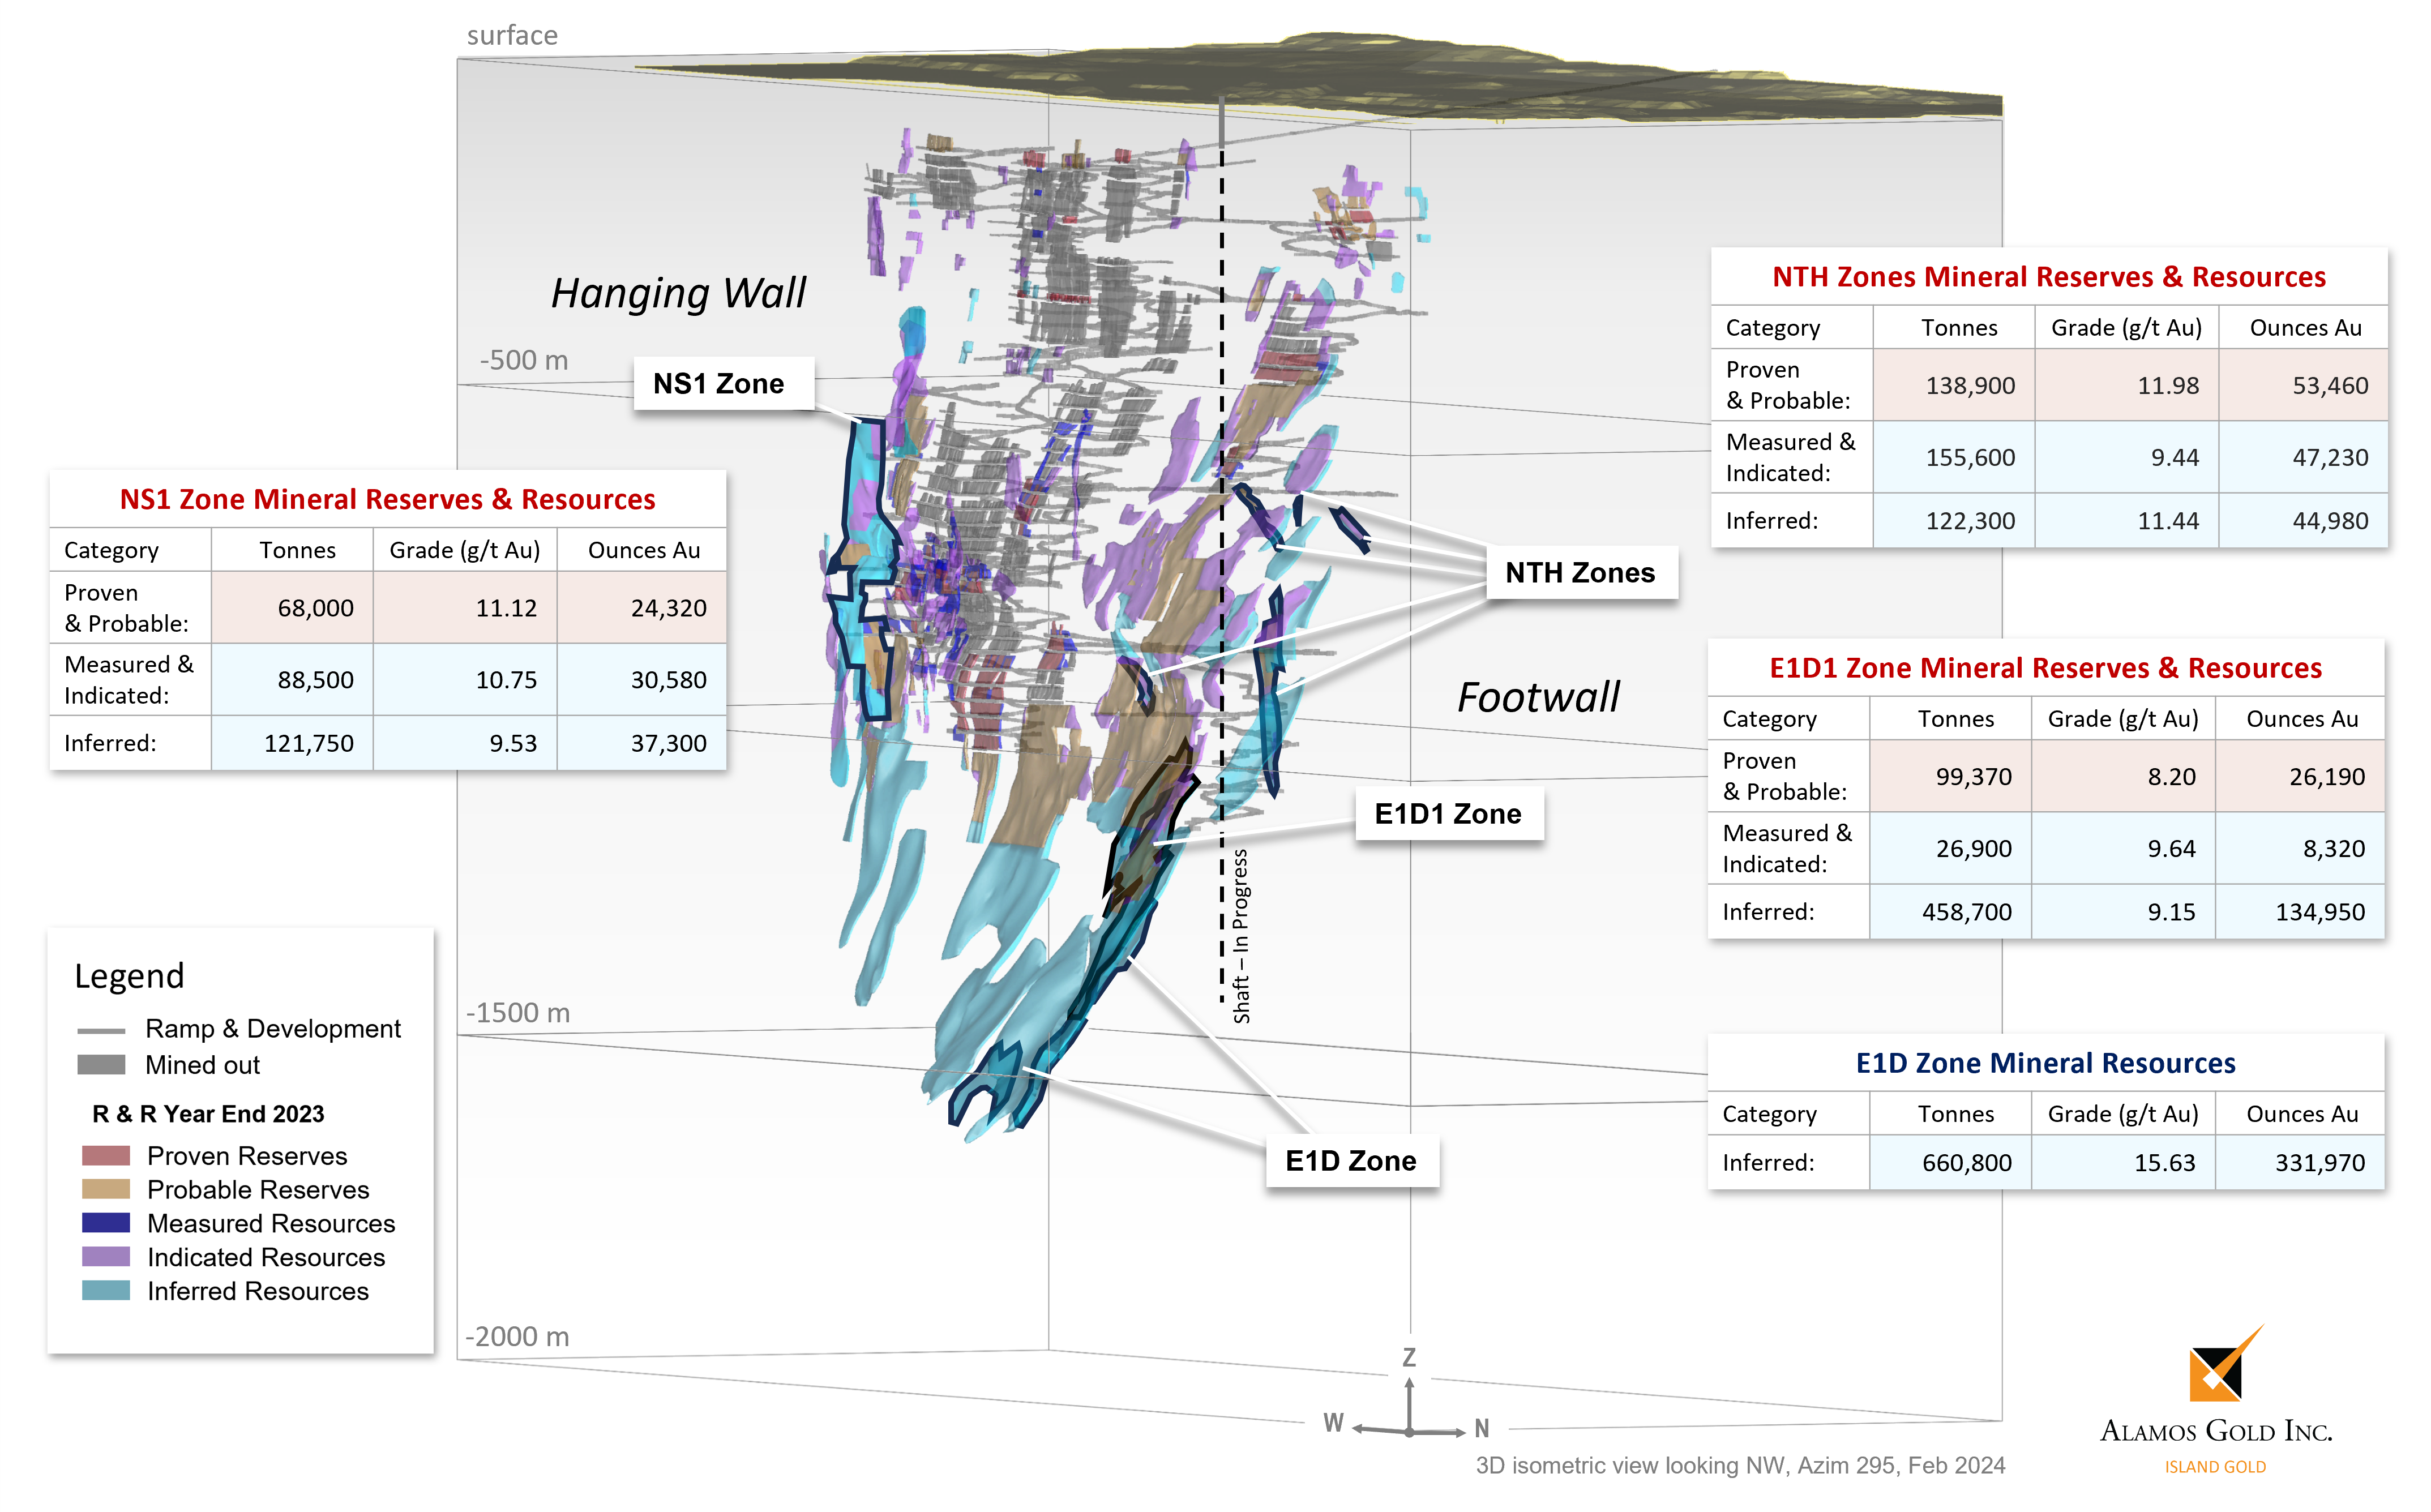 Figure 2 Island Gold Mine Hanging Wall and Footwall Zones – 2023 Mineral Reserves and Resources